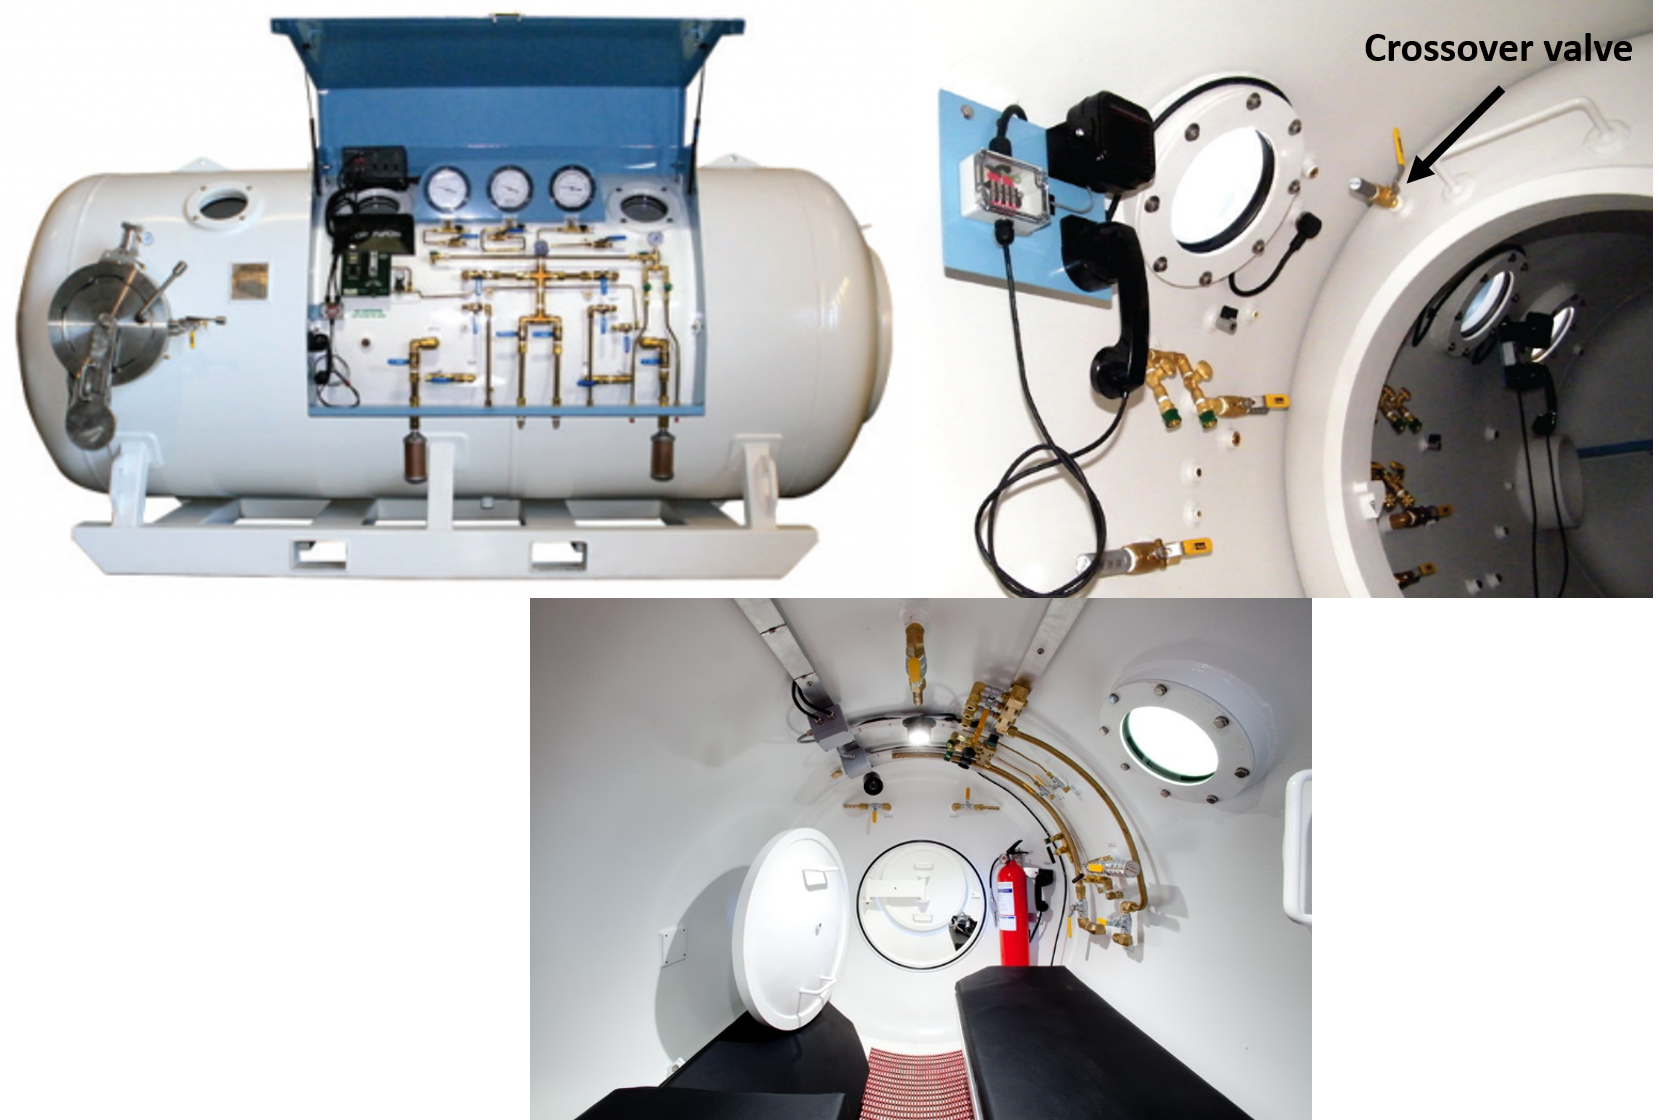 Upper left: deck decompression chamber (DDC) used in commercial diving